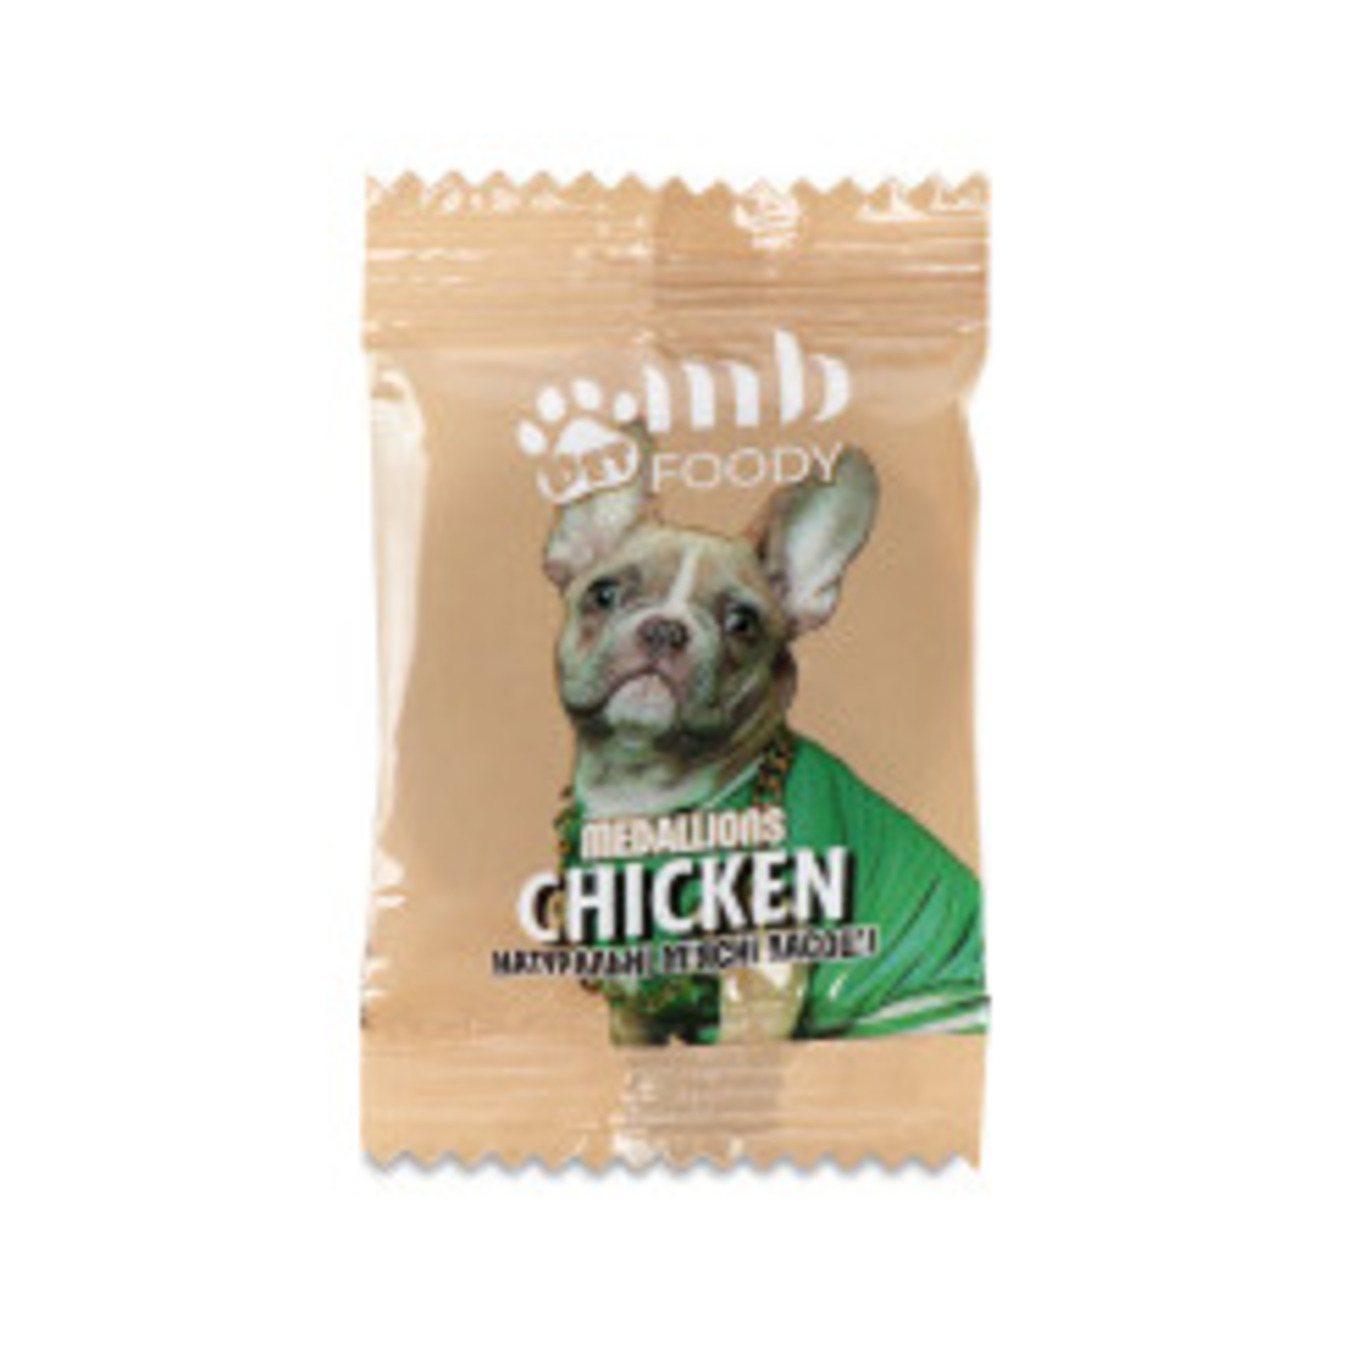 Treats for dogs Mb foody Medallions Chicken 4g